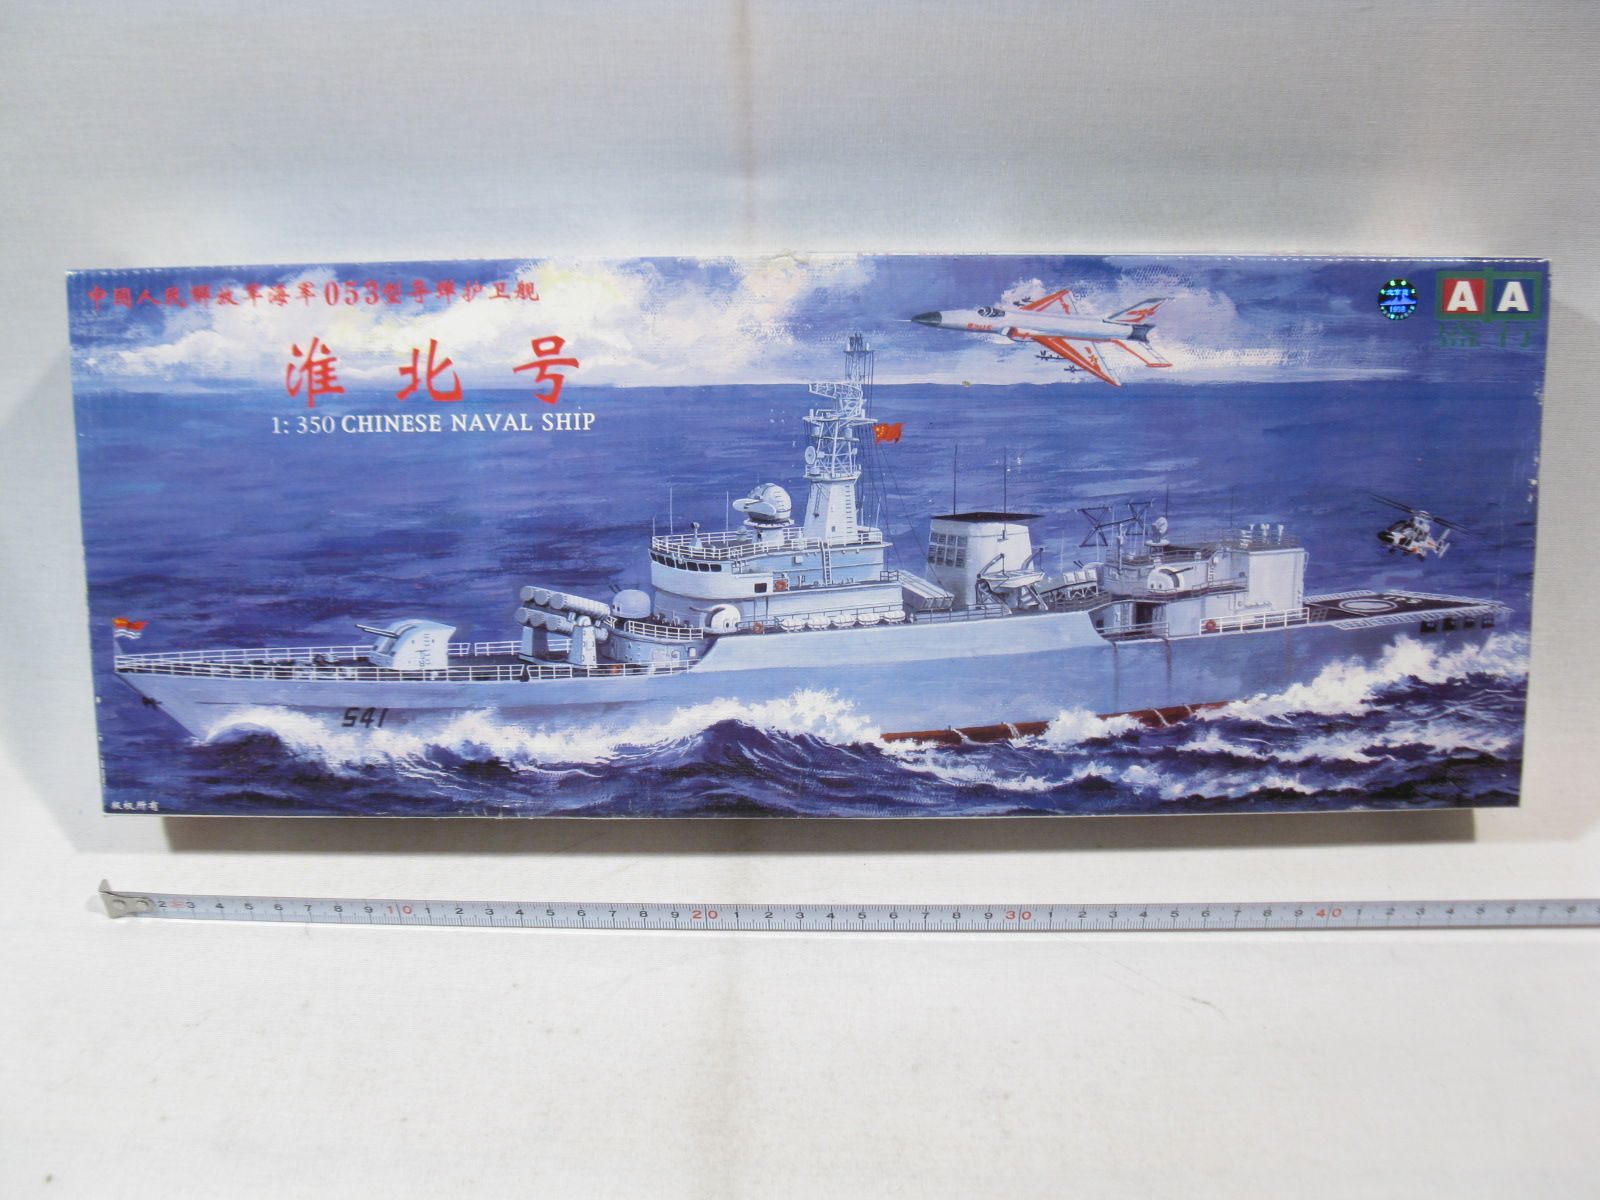 AA 4510  Chinese Naval Ship 541  mit Motor 1:350  sealed in box  mb4985